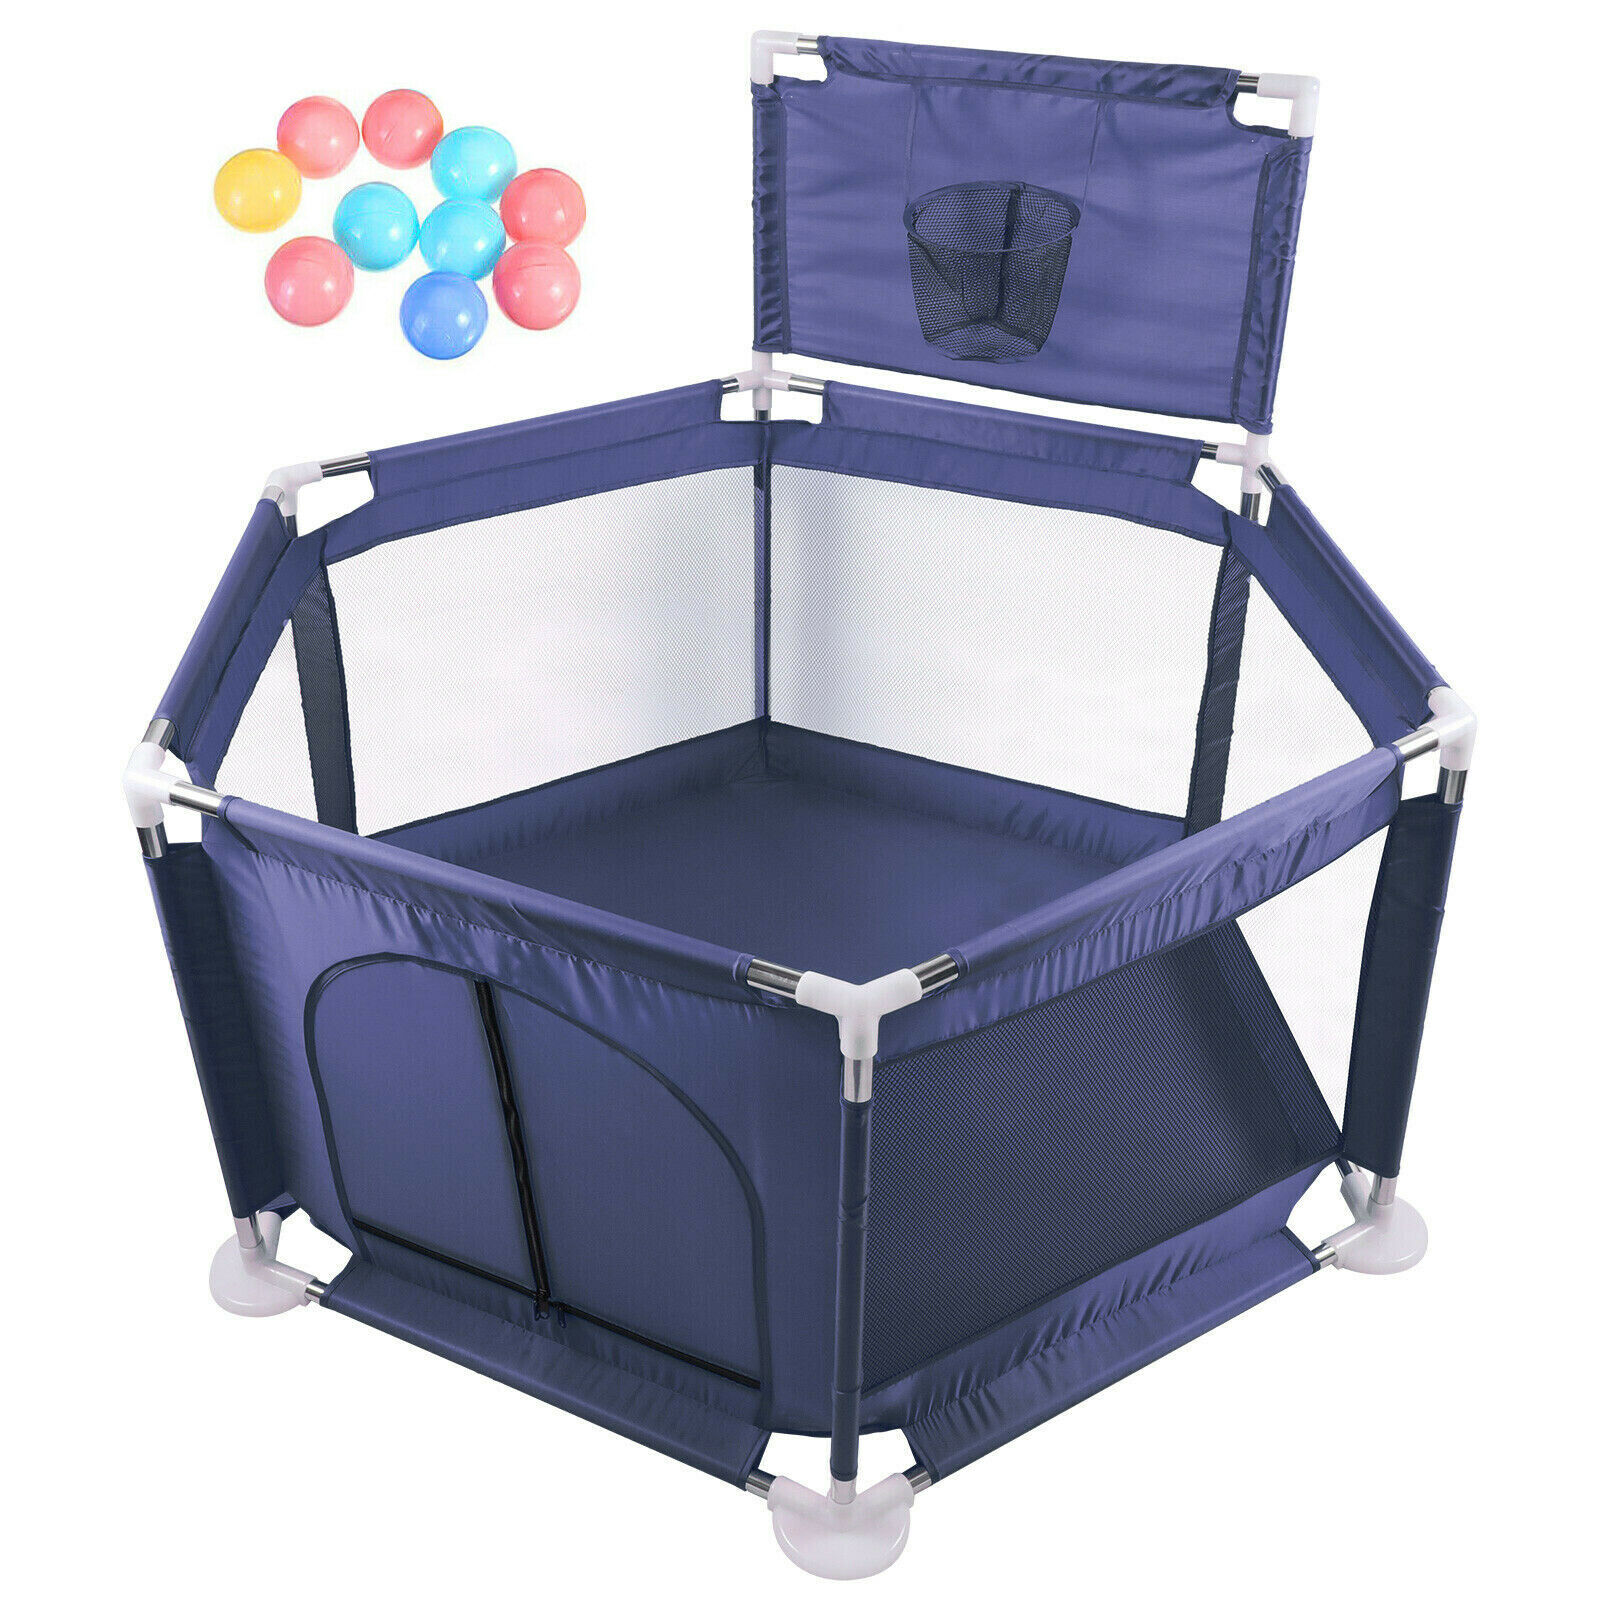 Baby Kids Playpen Fence Safety Foldable Activity Center Play Yard Oxford 10 Ball